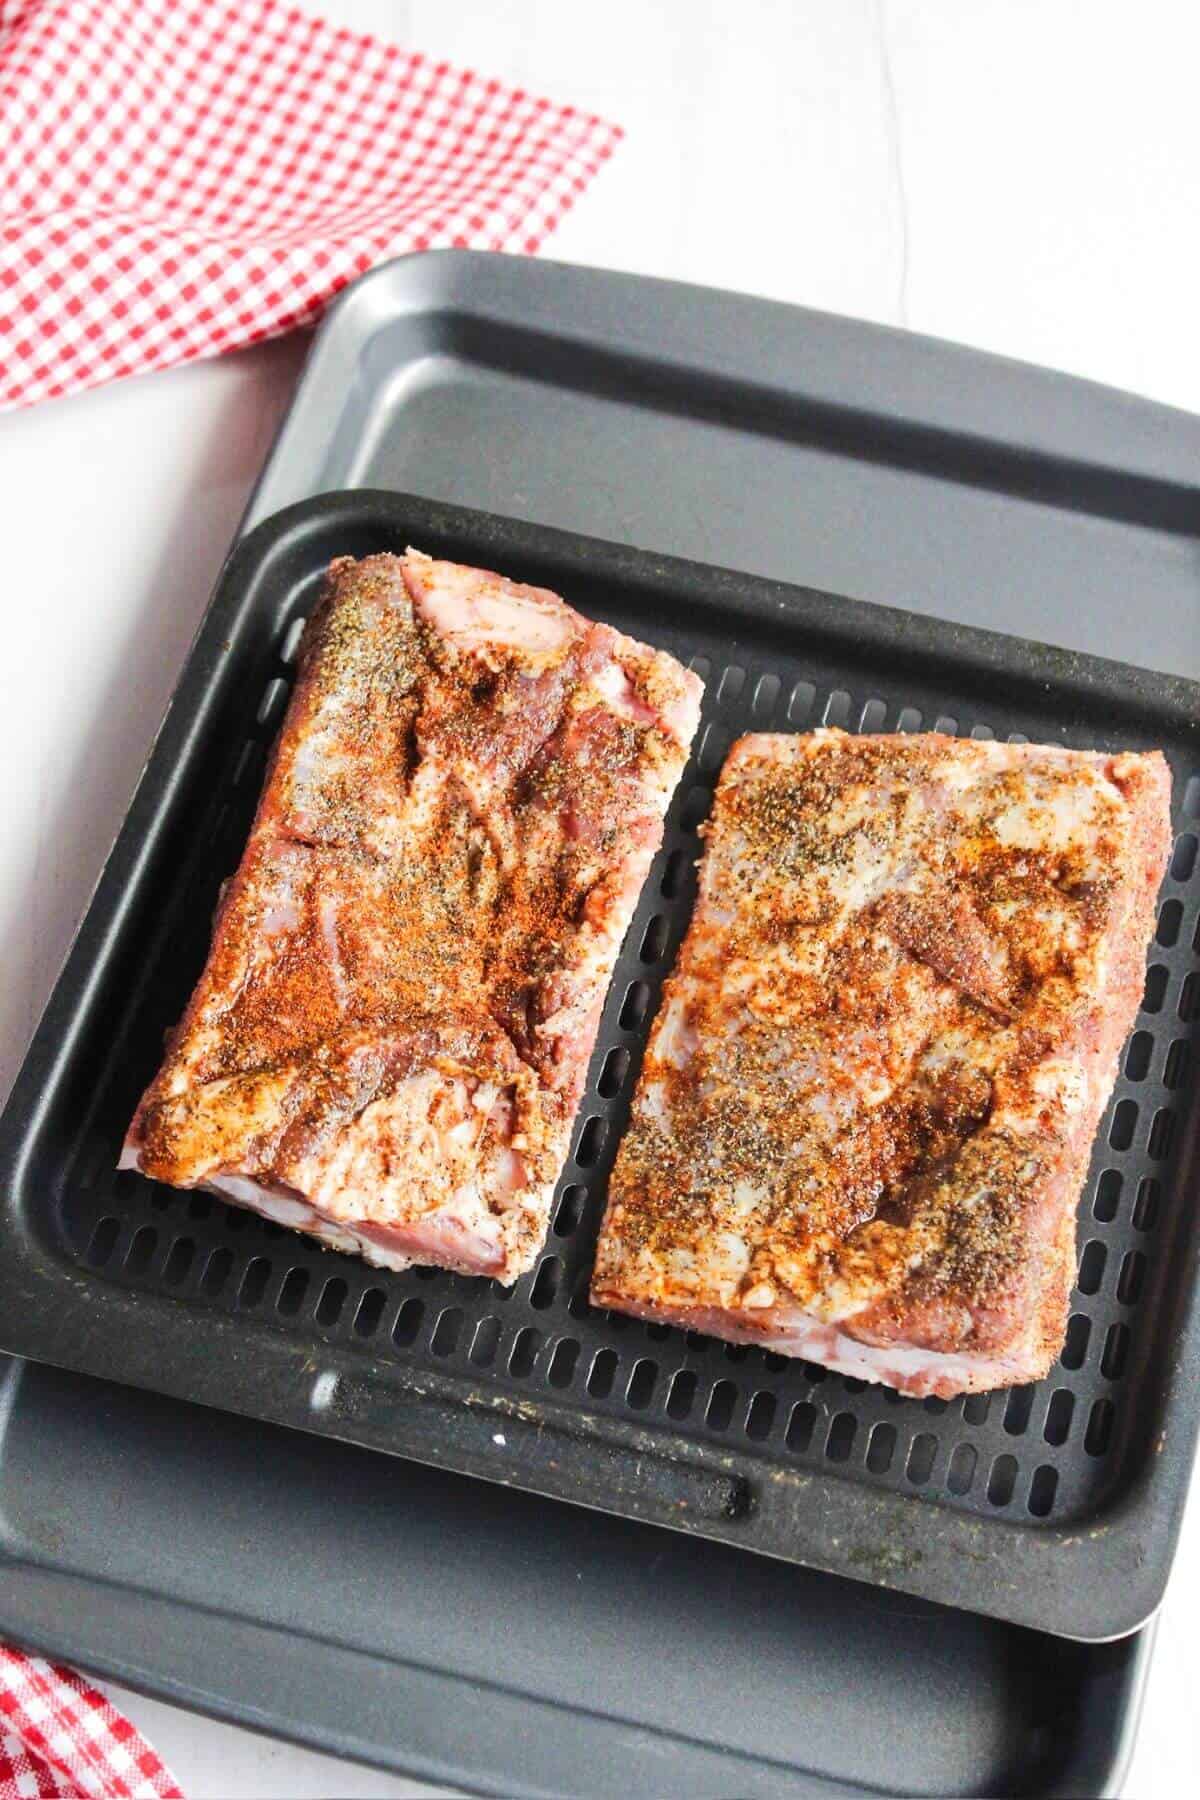 Two pieces of pork ribs on a grill pan.